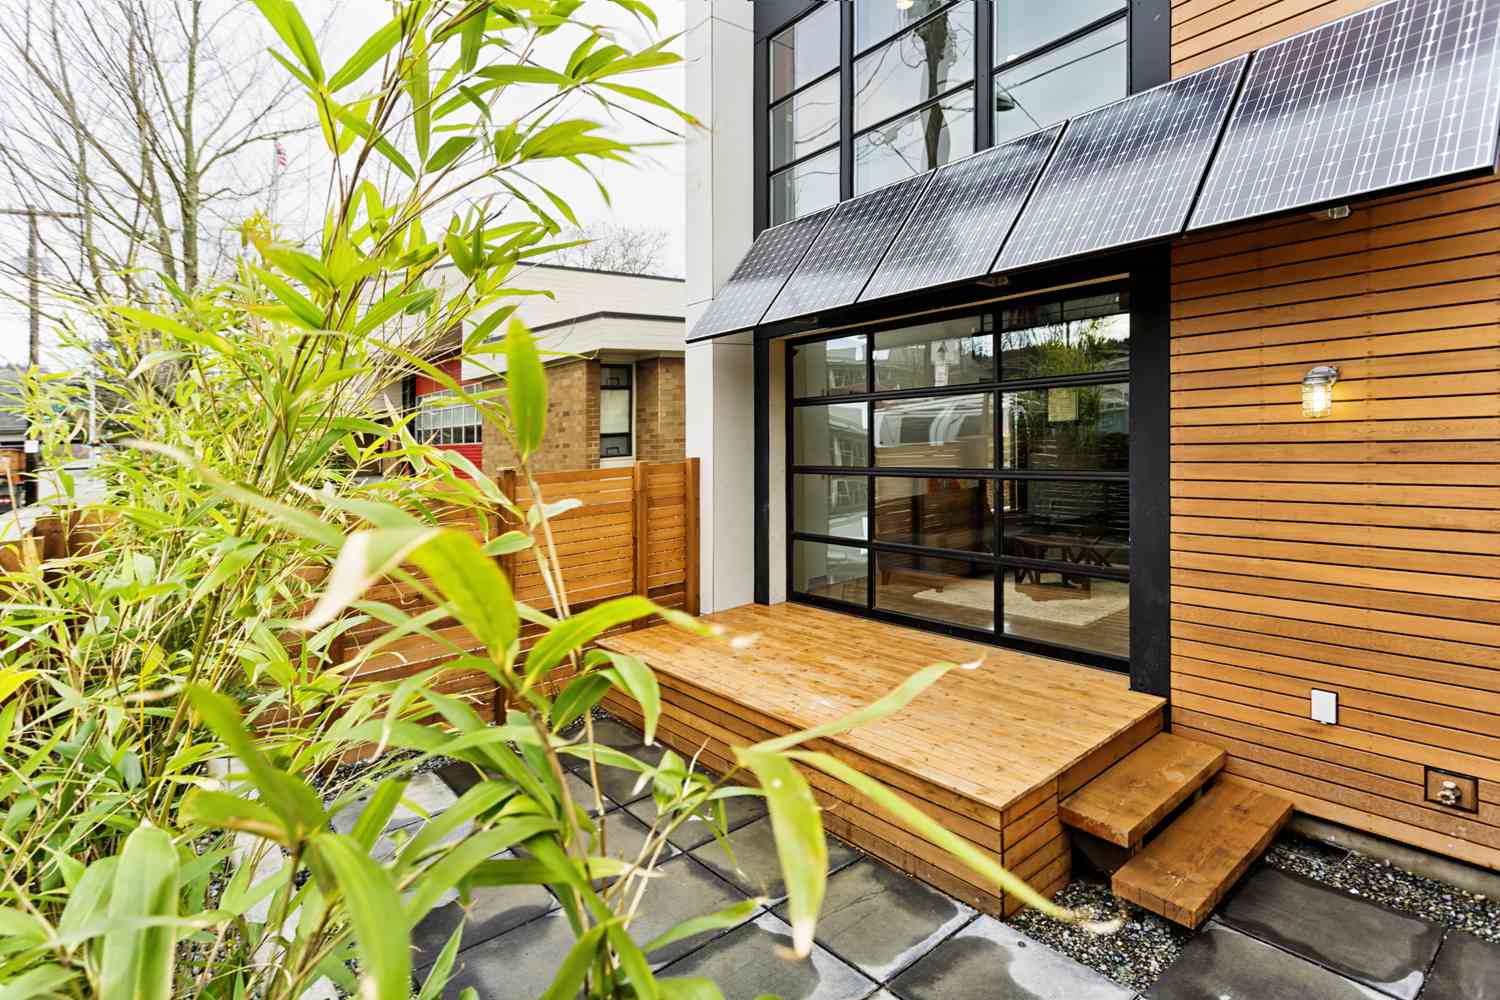 living green with solar panels 155421350 582b41b85f9b58d5b12af600 Balancing Ecology and Durability in Material Choices